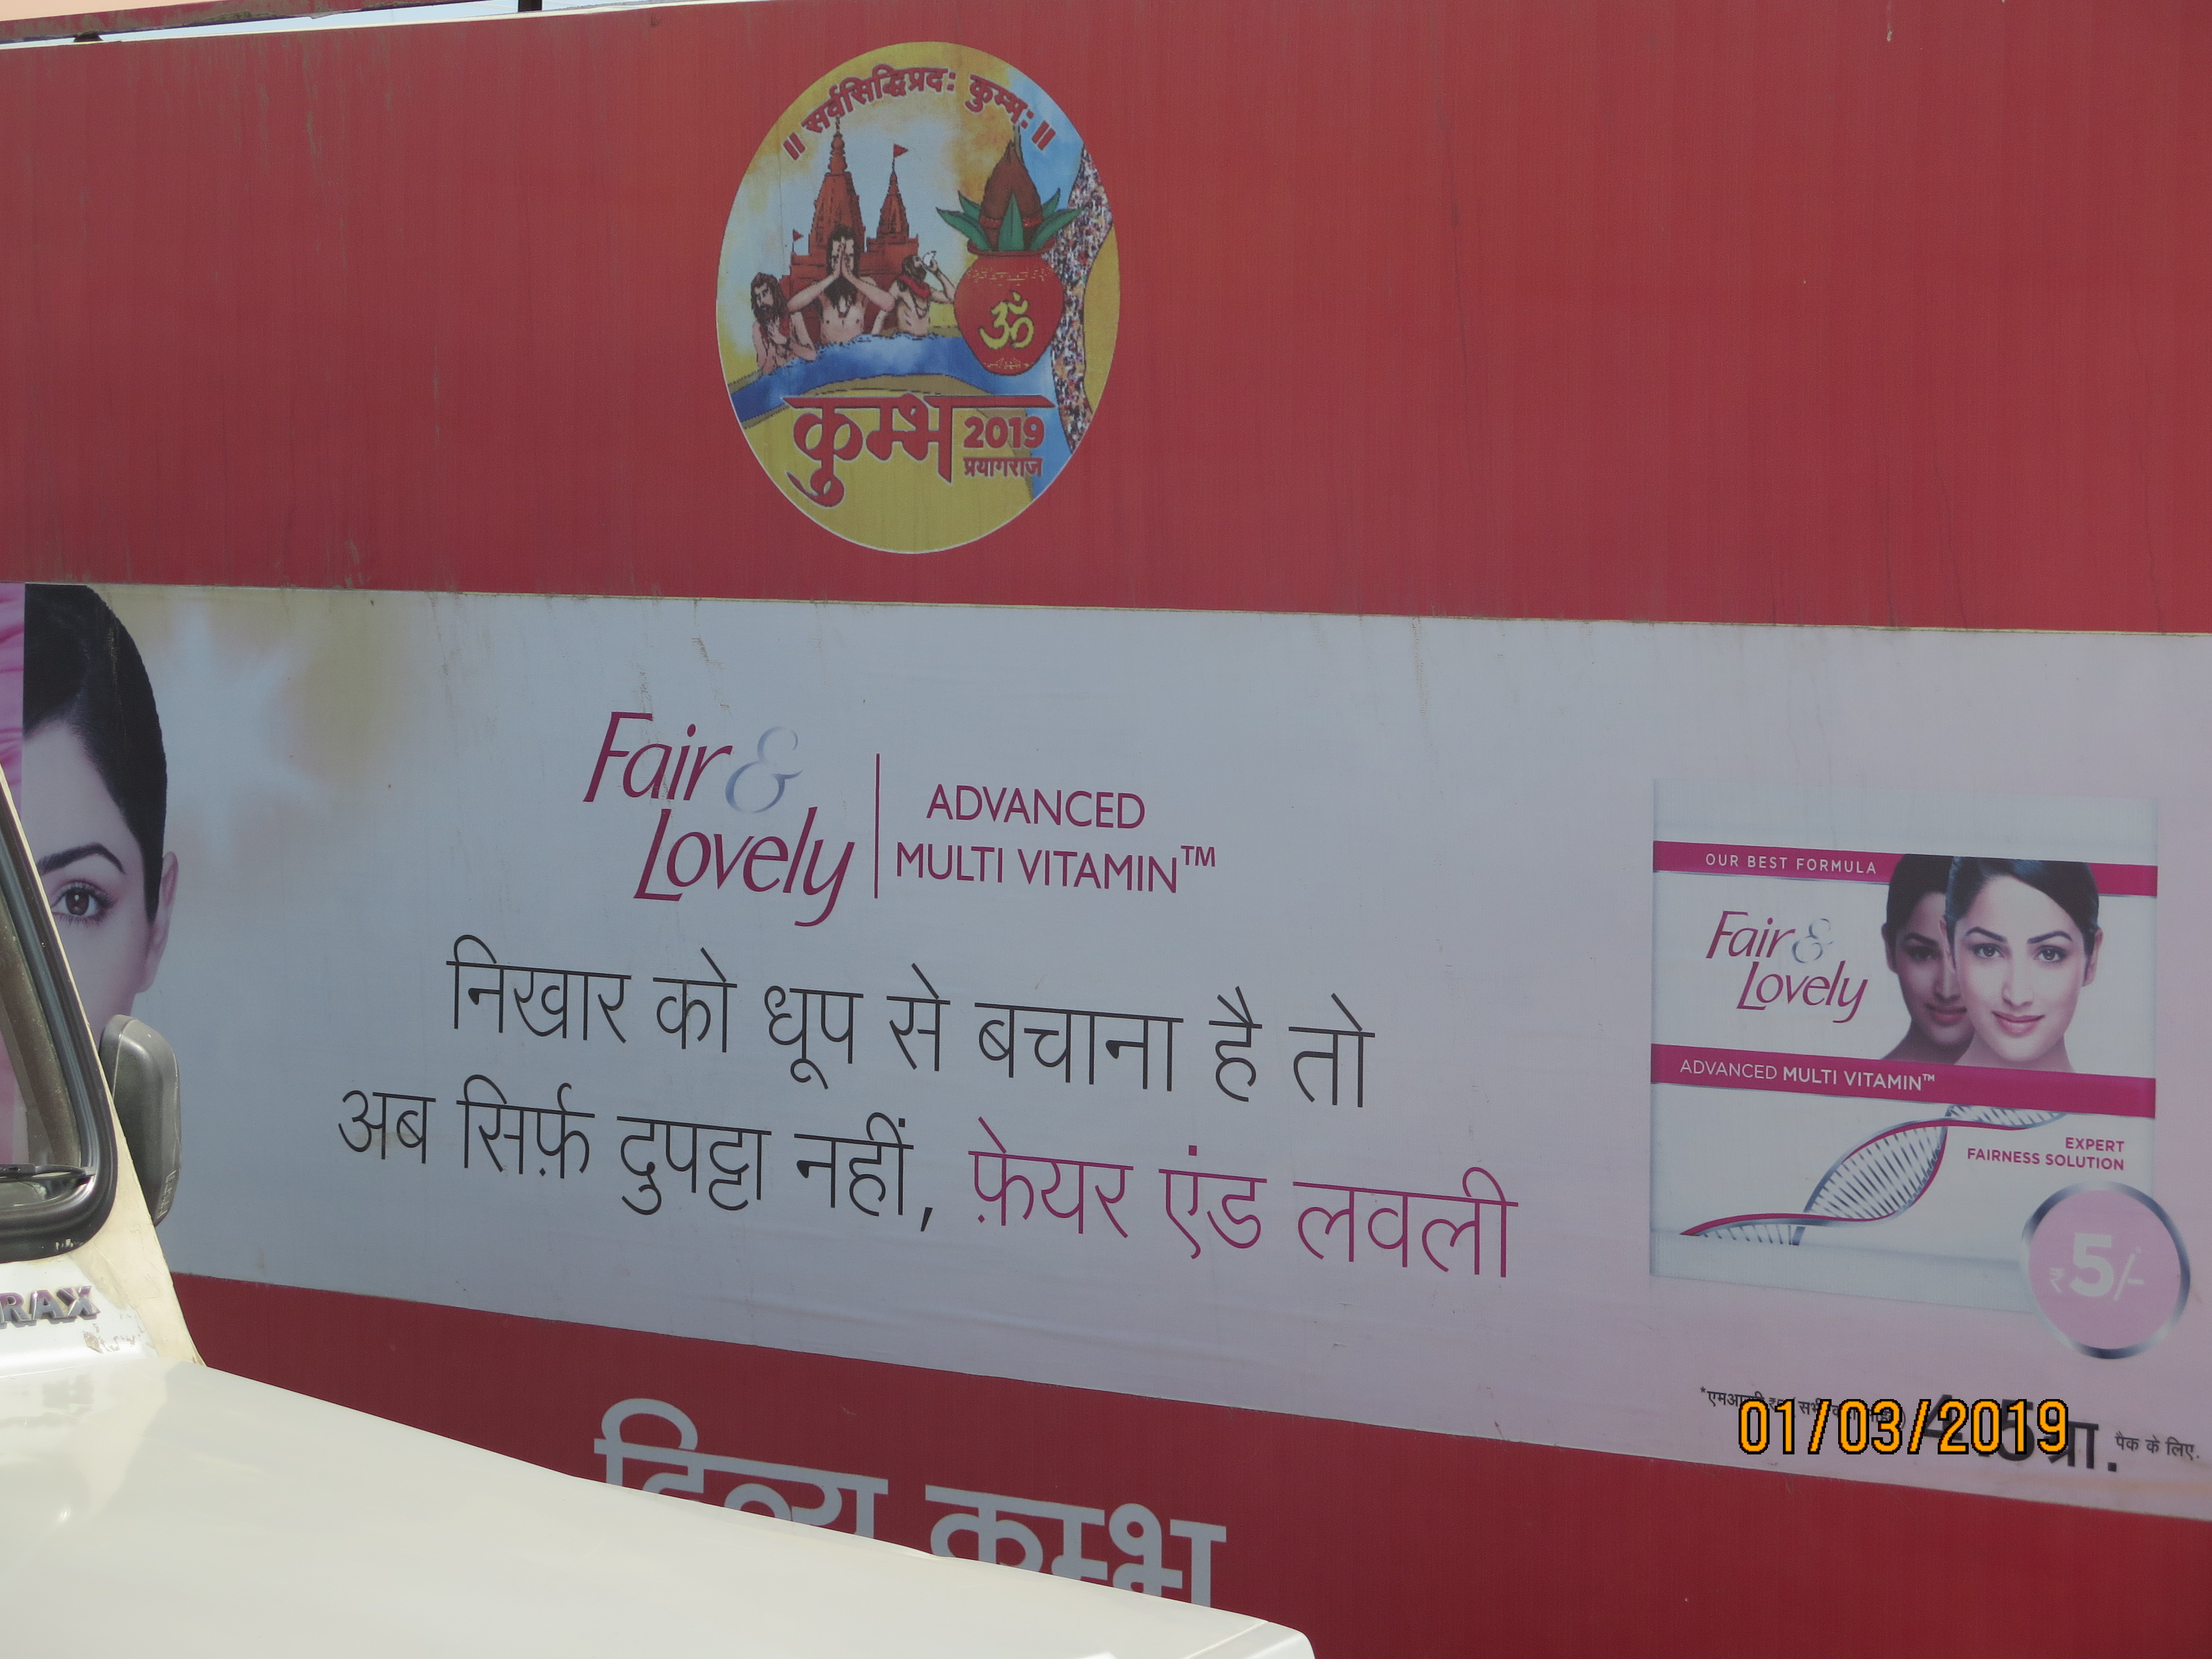 Banner with Kumbh logo and Fair and Lovely message